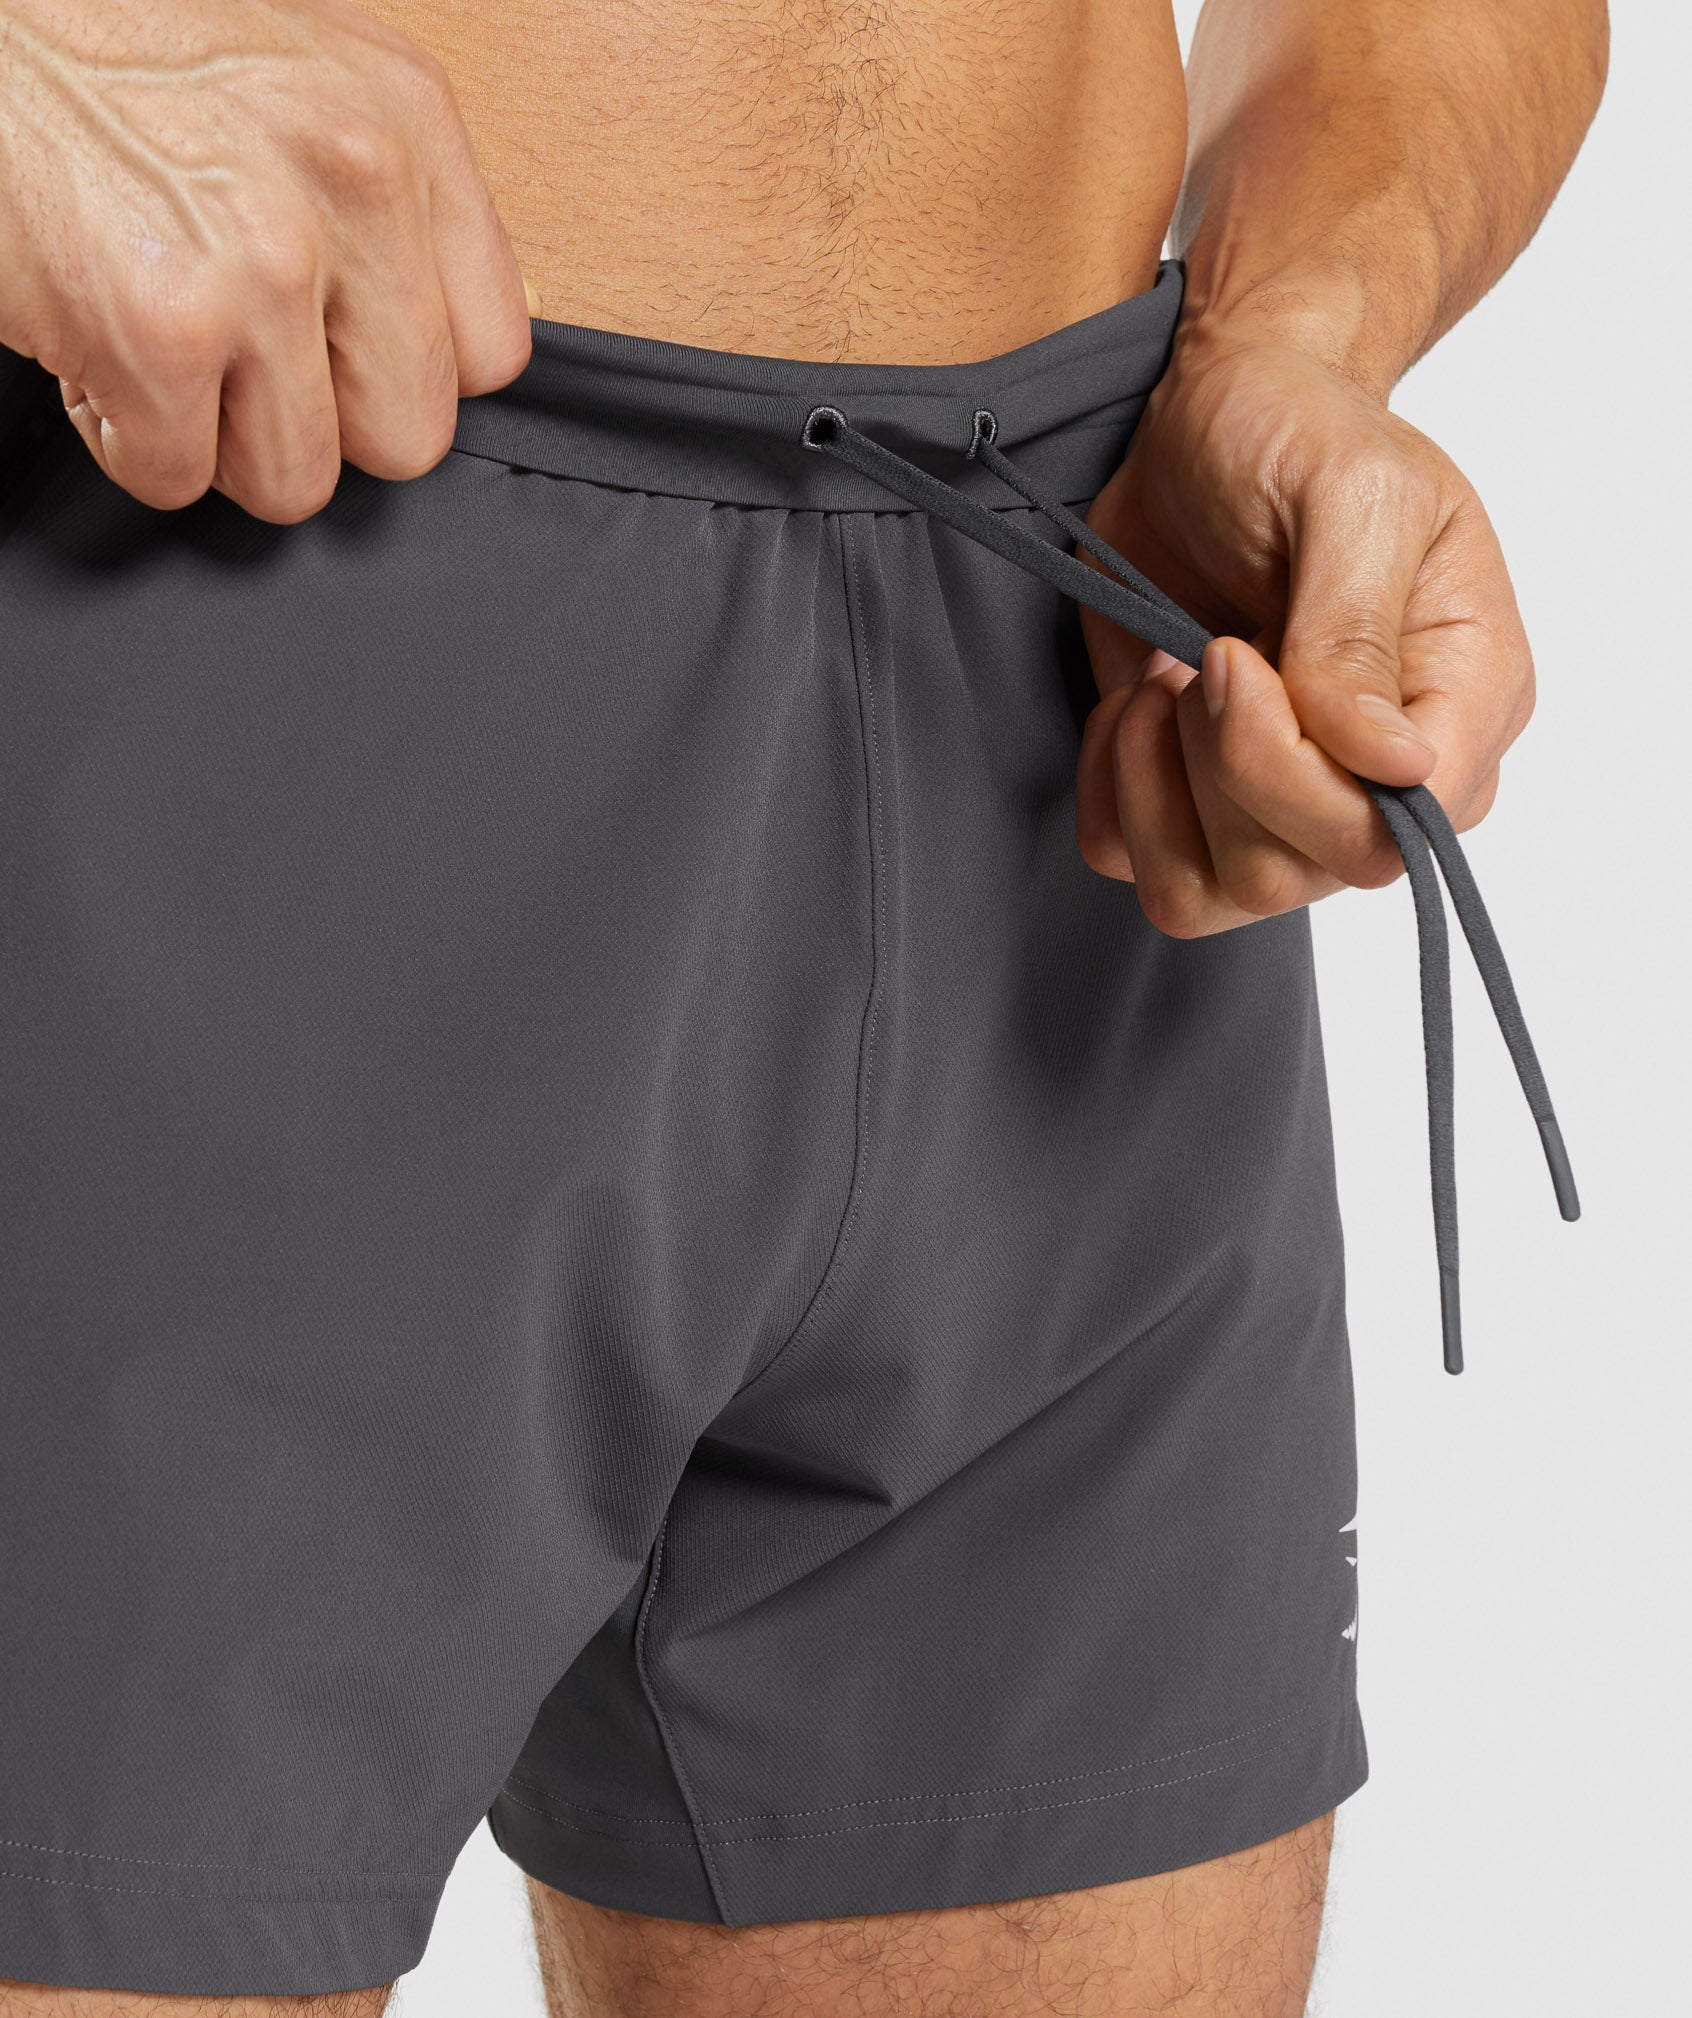 Apex 5" Perform Shorts in Onyx Grey - view 6